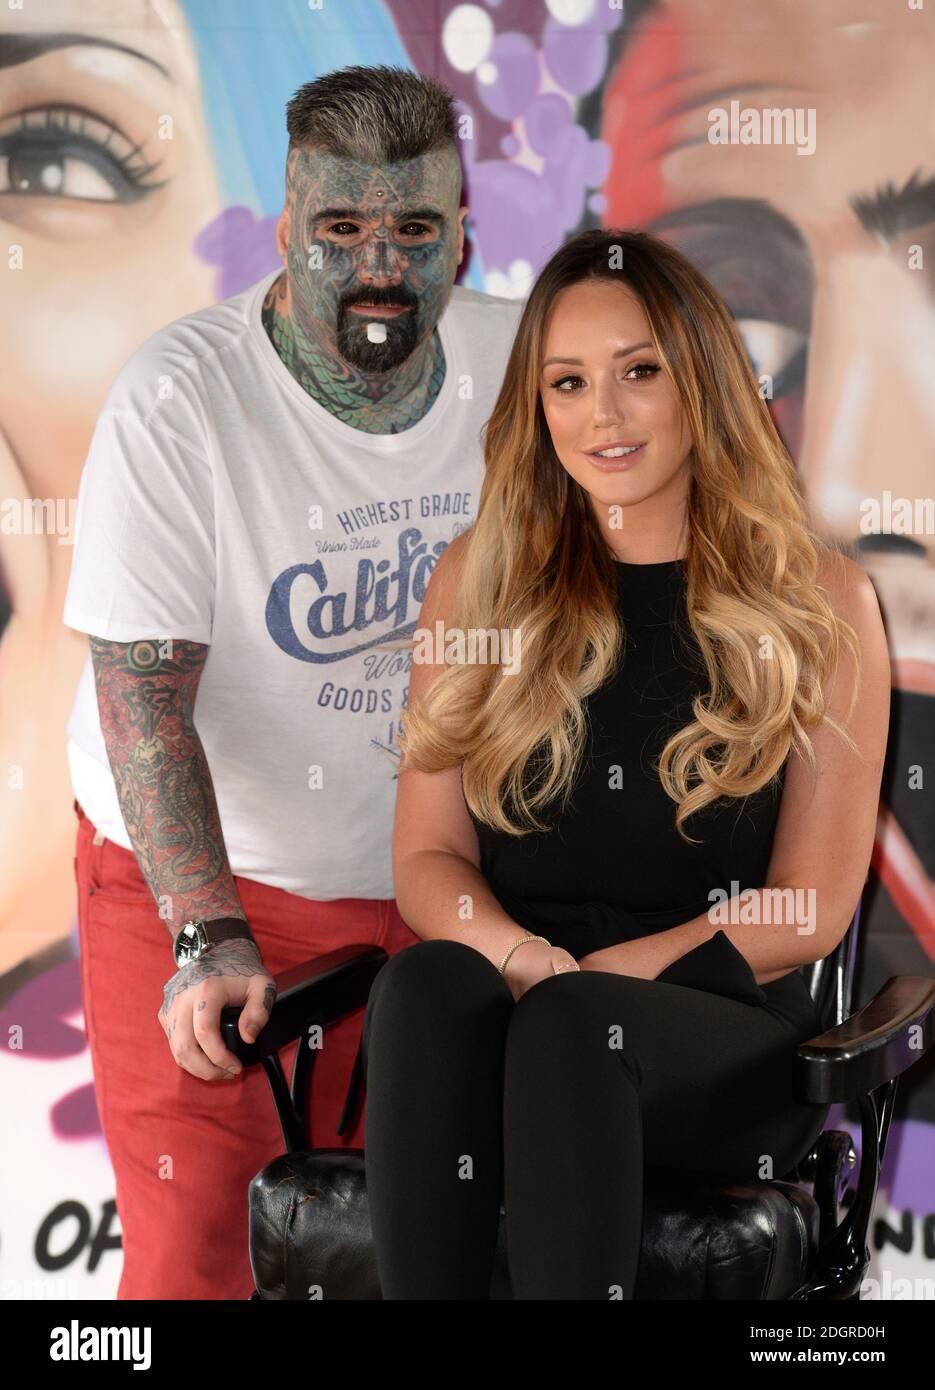 Tattoo Fixers Have Spoken Out About Charlotte Crosby's New Tattoo Show &  It's Fiesty AF - Capital